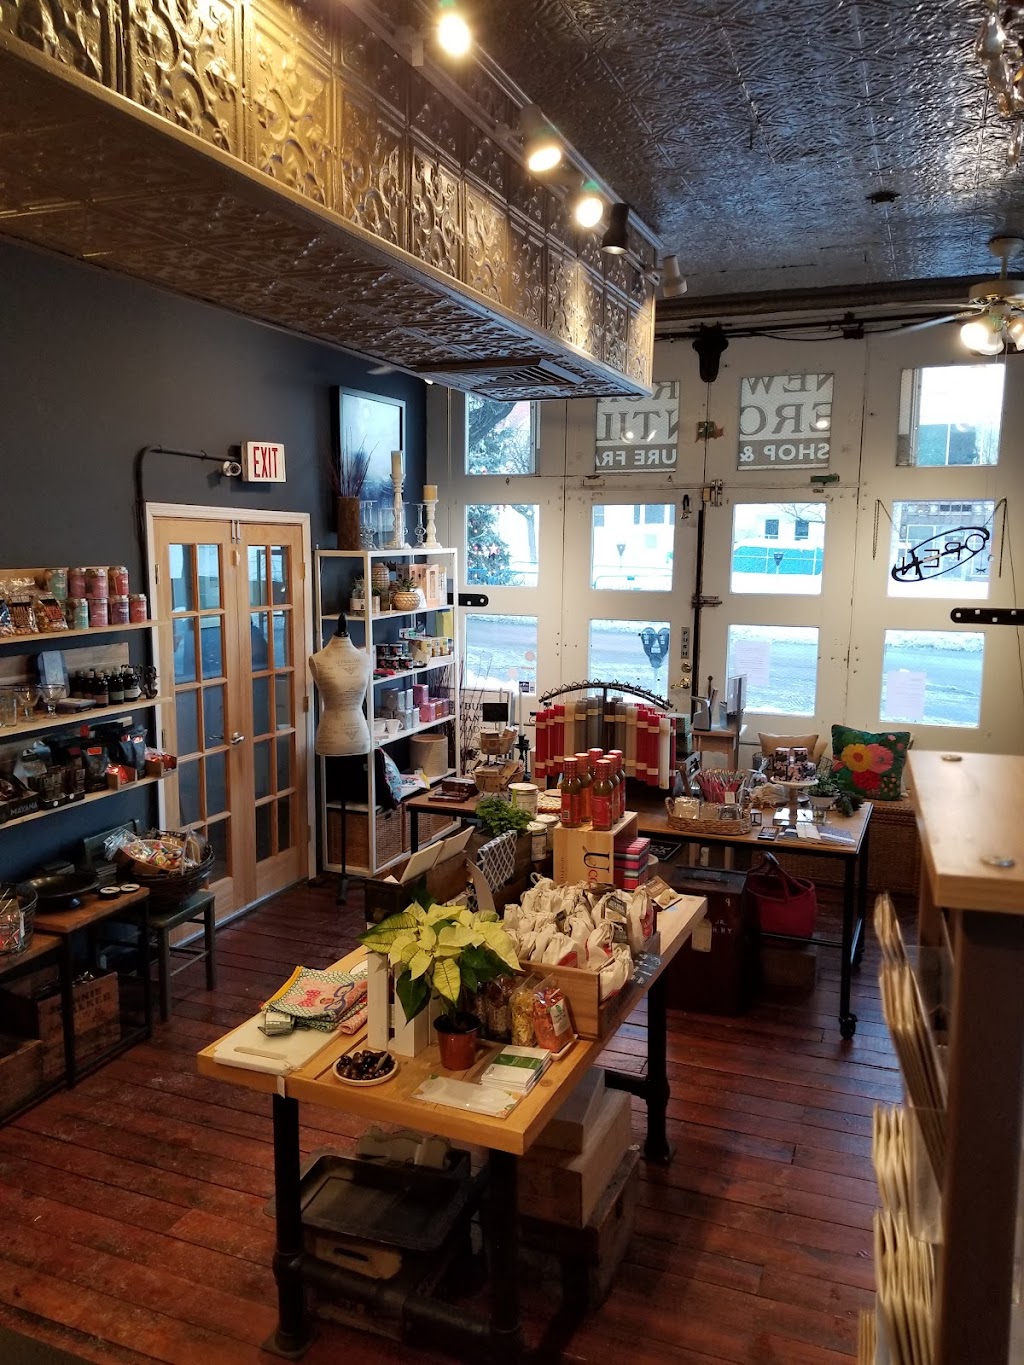 Newburgh Mercantile Gifts and Picture Framing | 75 Broadway, Newburgh, NY 12550 | Phone: (845) 569-7266